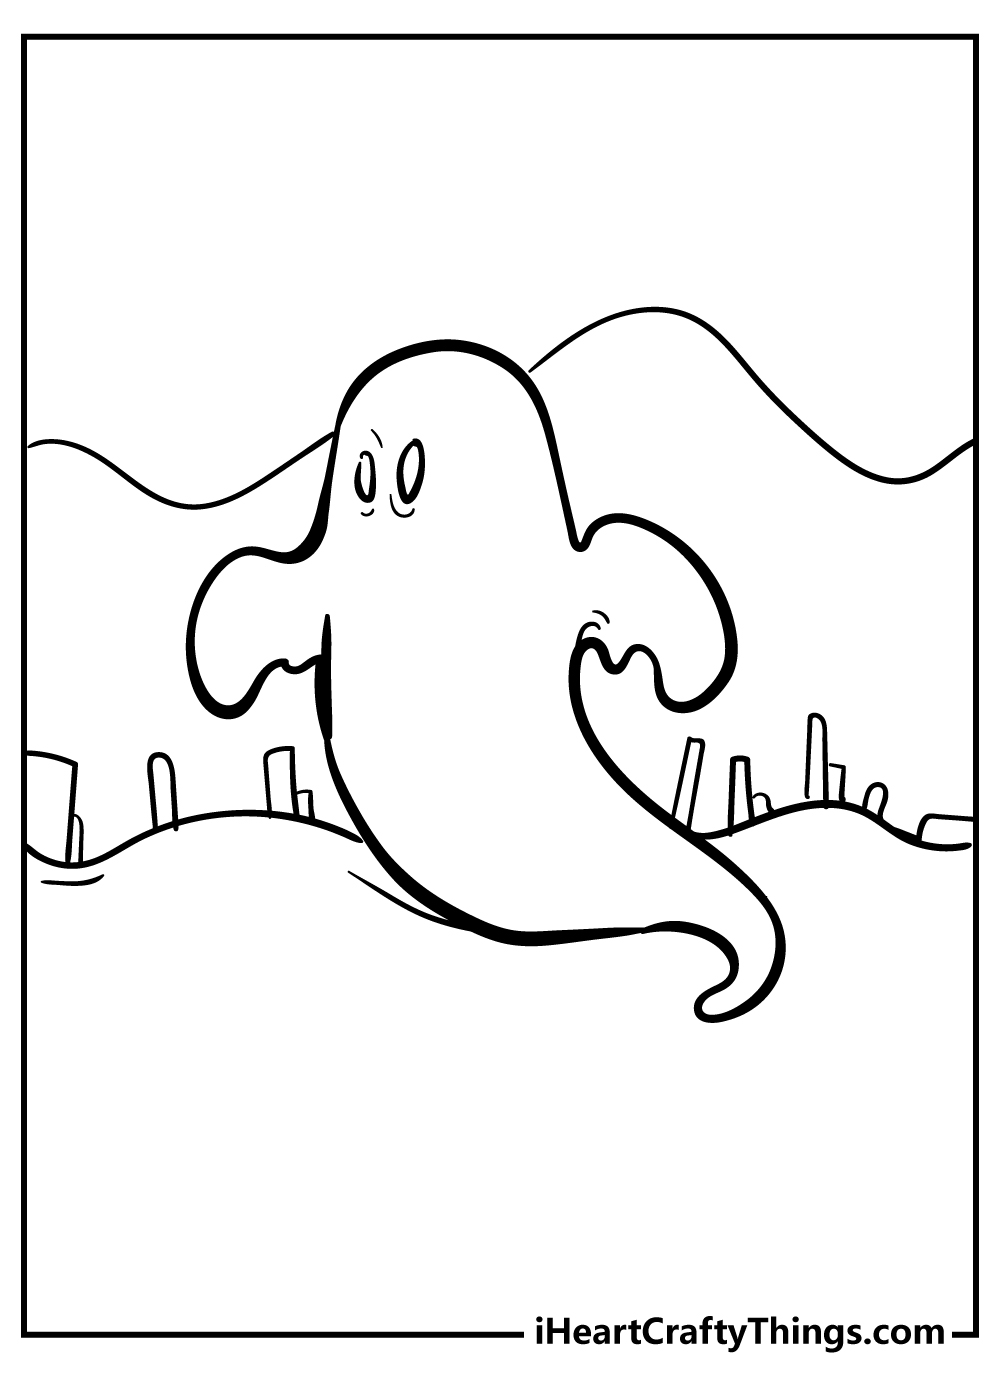 Spooky Coloring Pages for preschoolers free printable